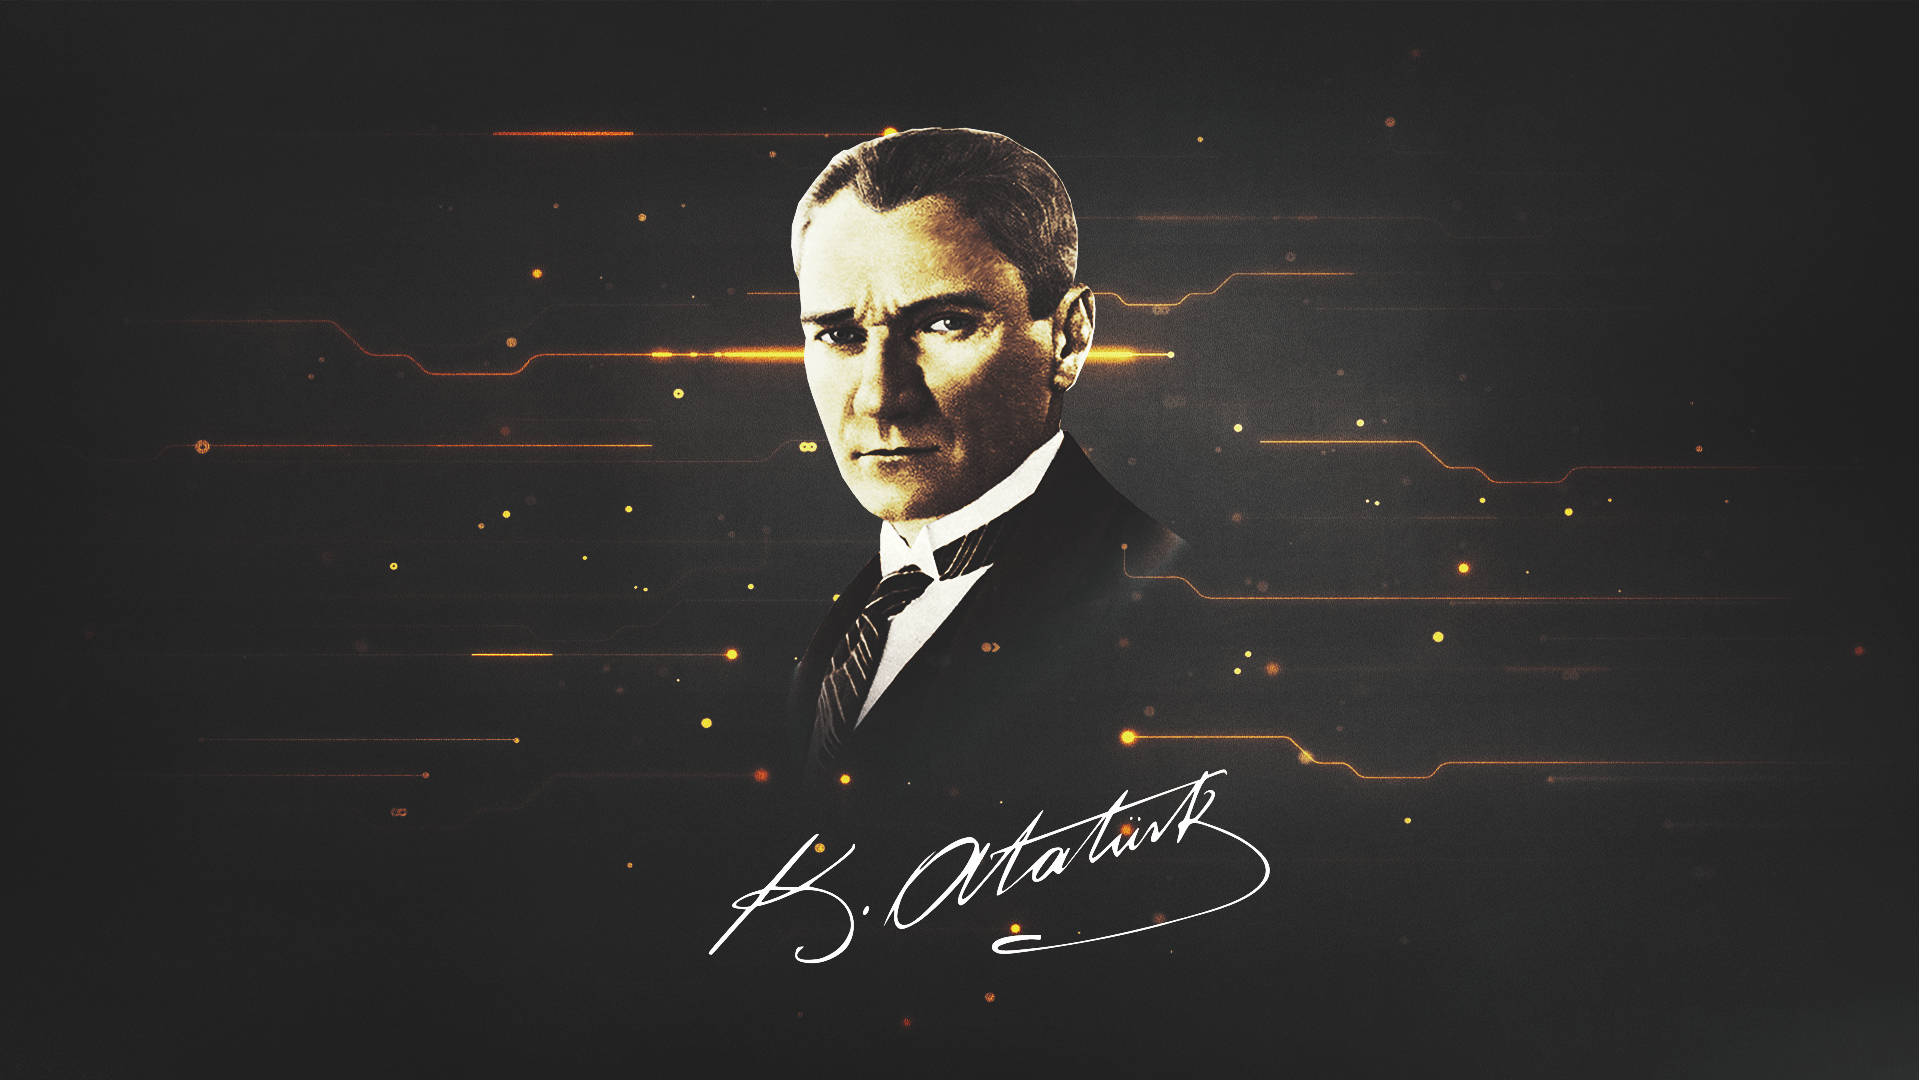 Top 999+ Ataturk Wallpapers Full HD, 4K✅Free to Use